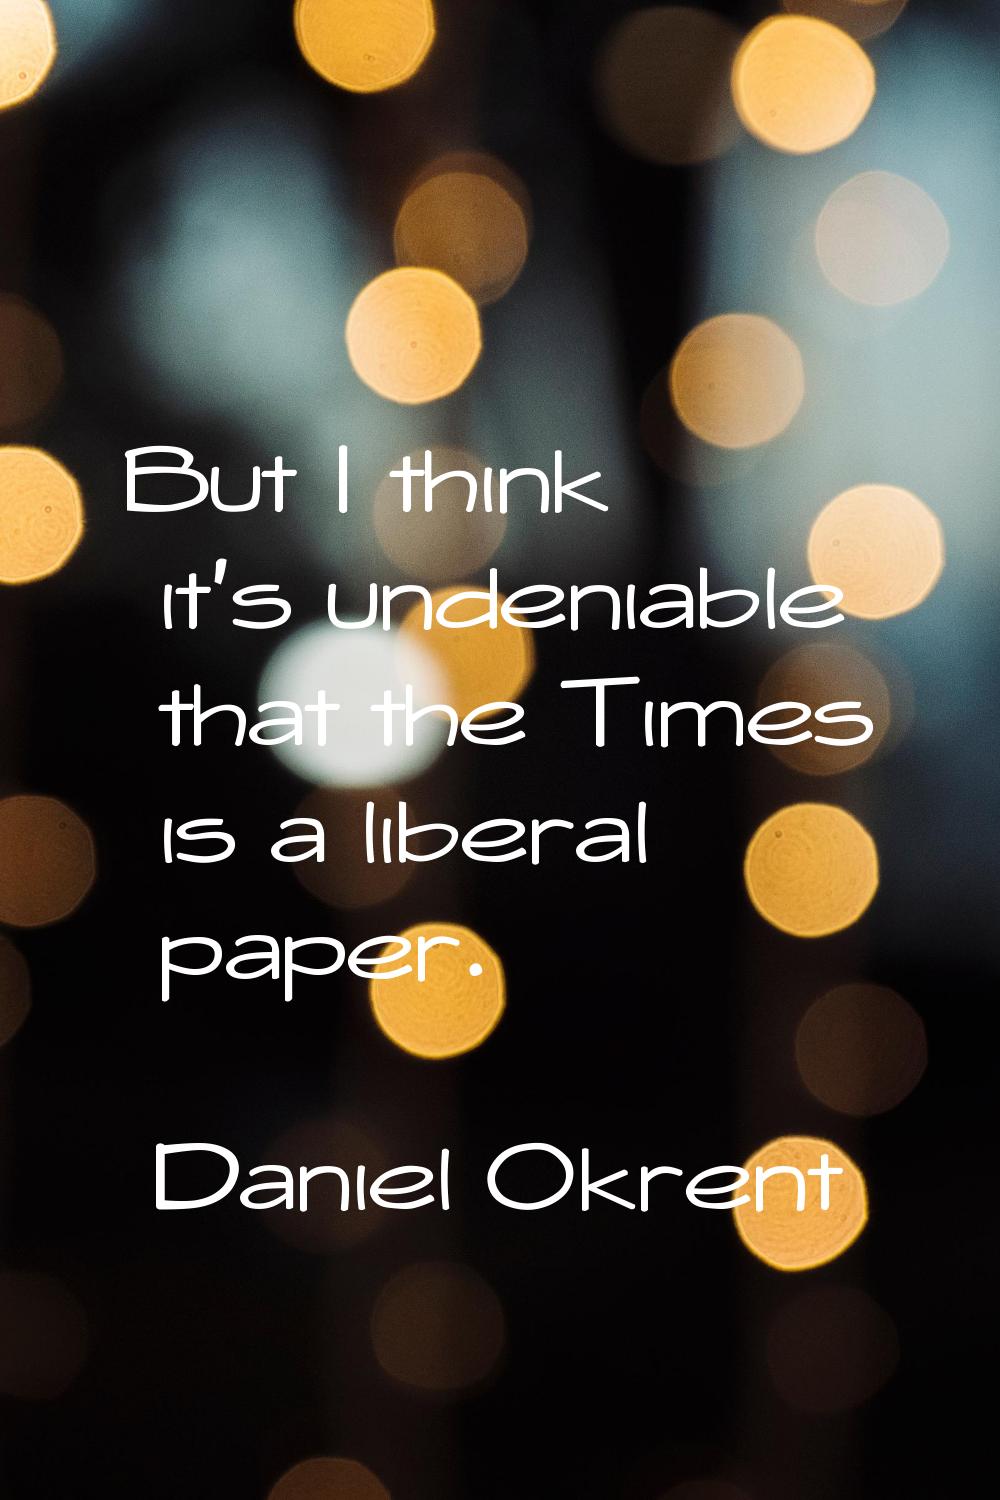 But I think it's undeniable that the Times is a liberal paper.